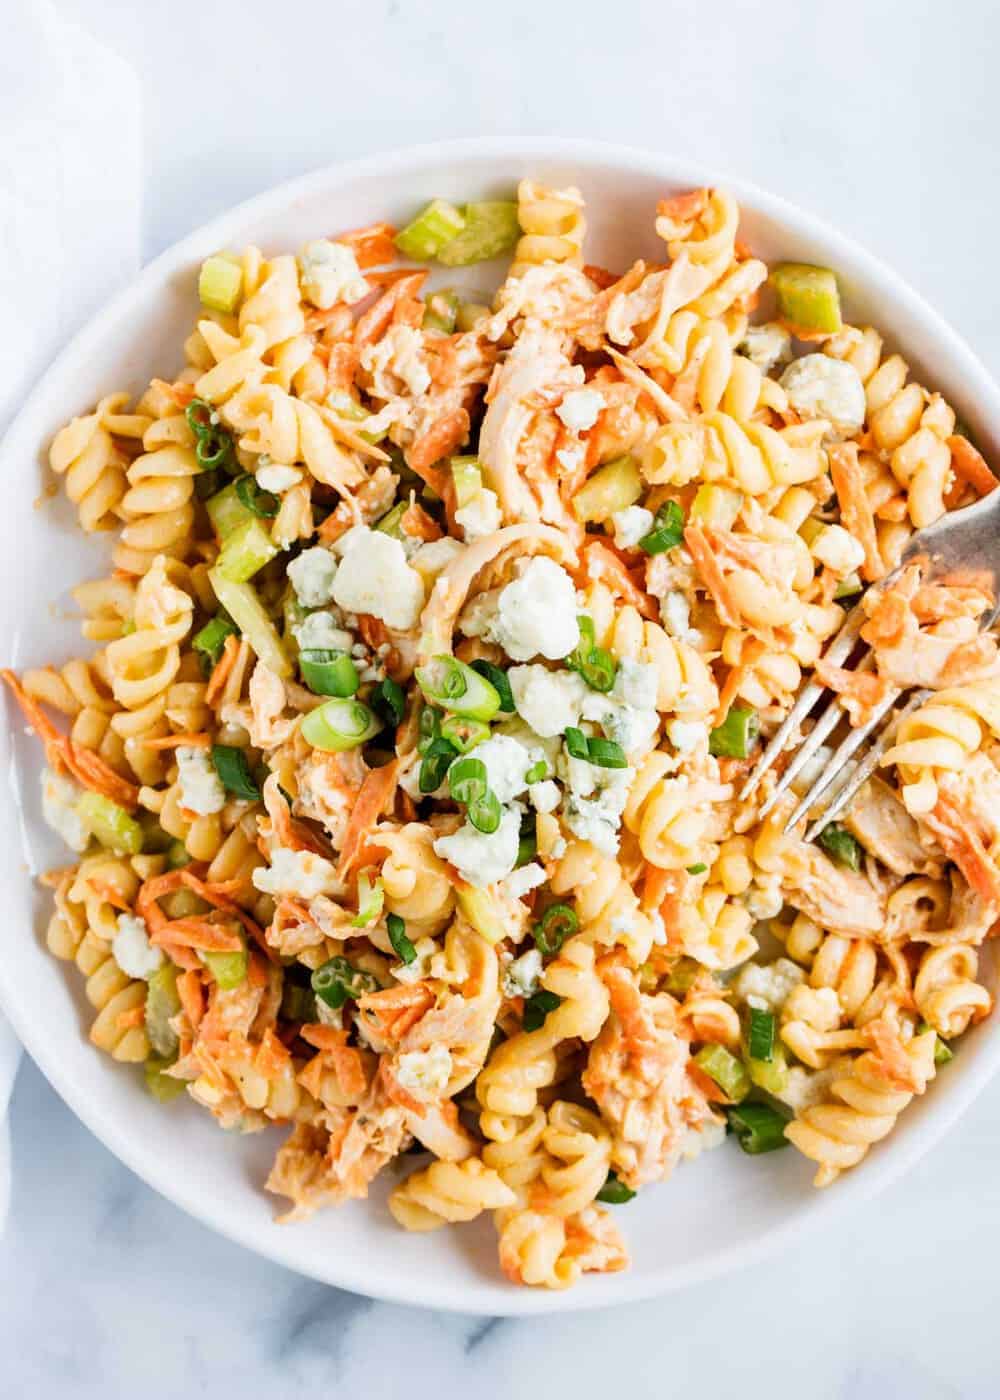 Buffalo chicken pasta salad on a white plate with fork.